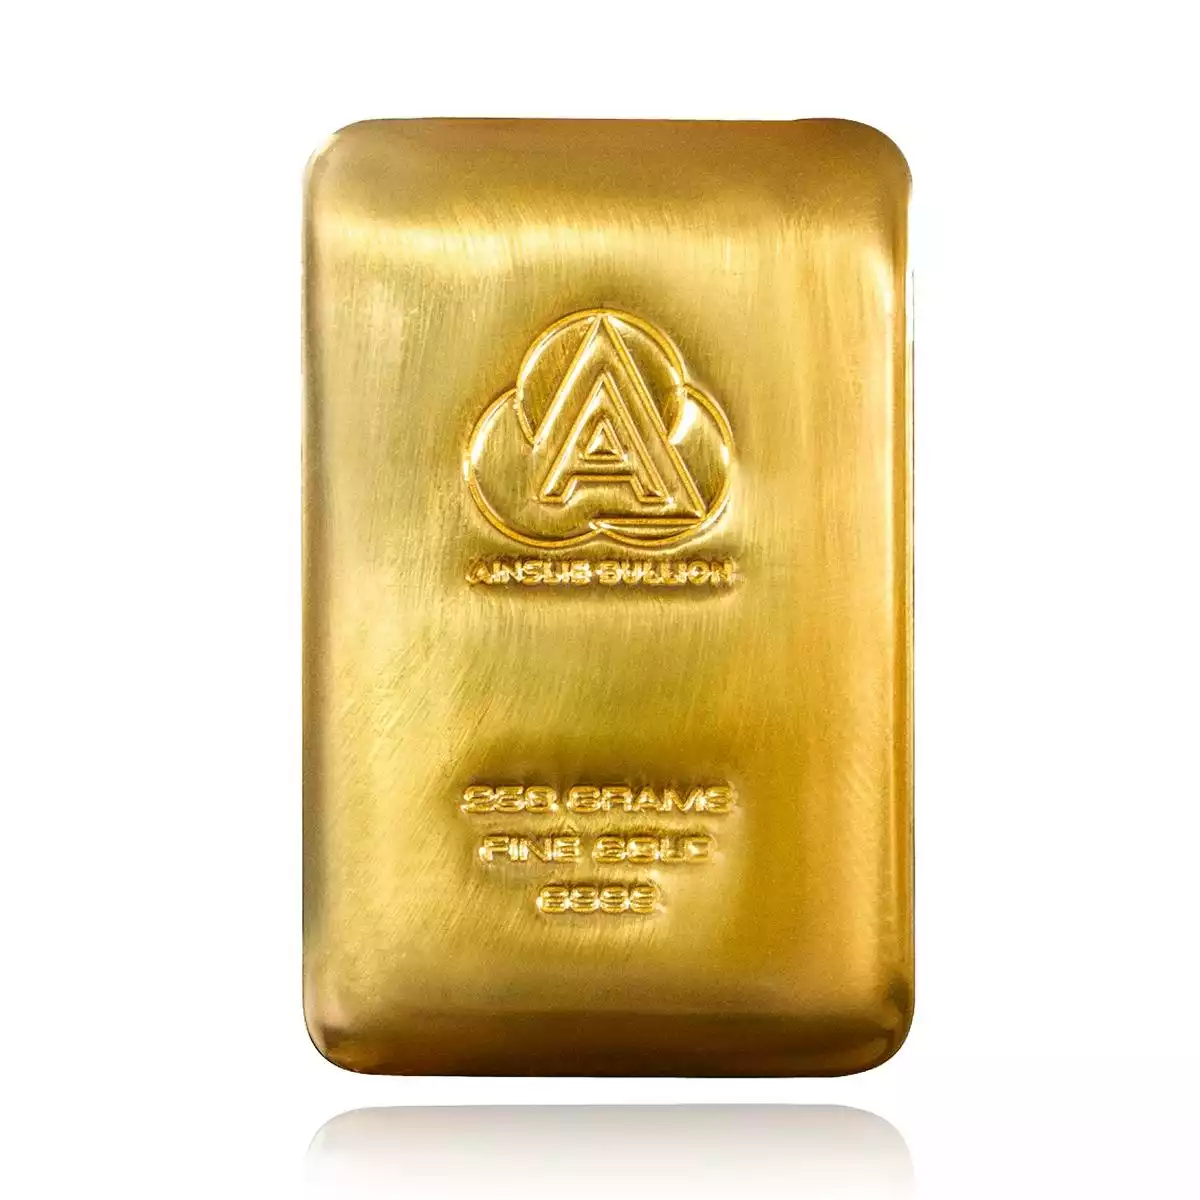 250g ainslie gold bullion. this 250g ainslie gold bar is a cast bar with each bar having a slightly unique surface pattern. each gold bar is struck wi...